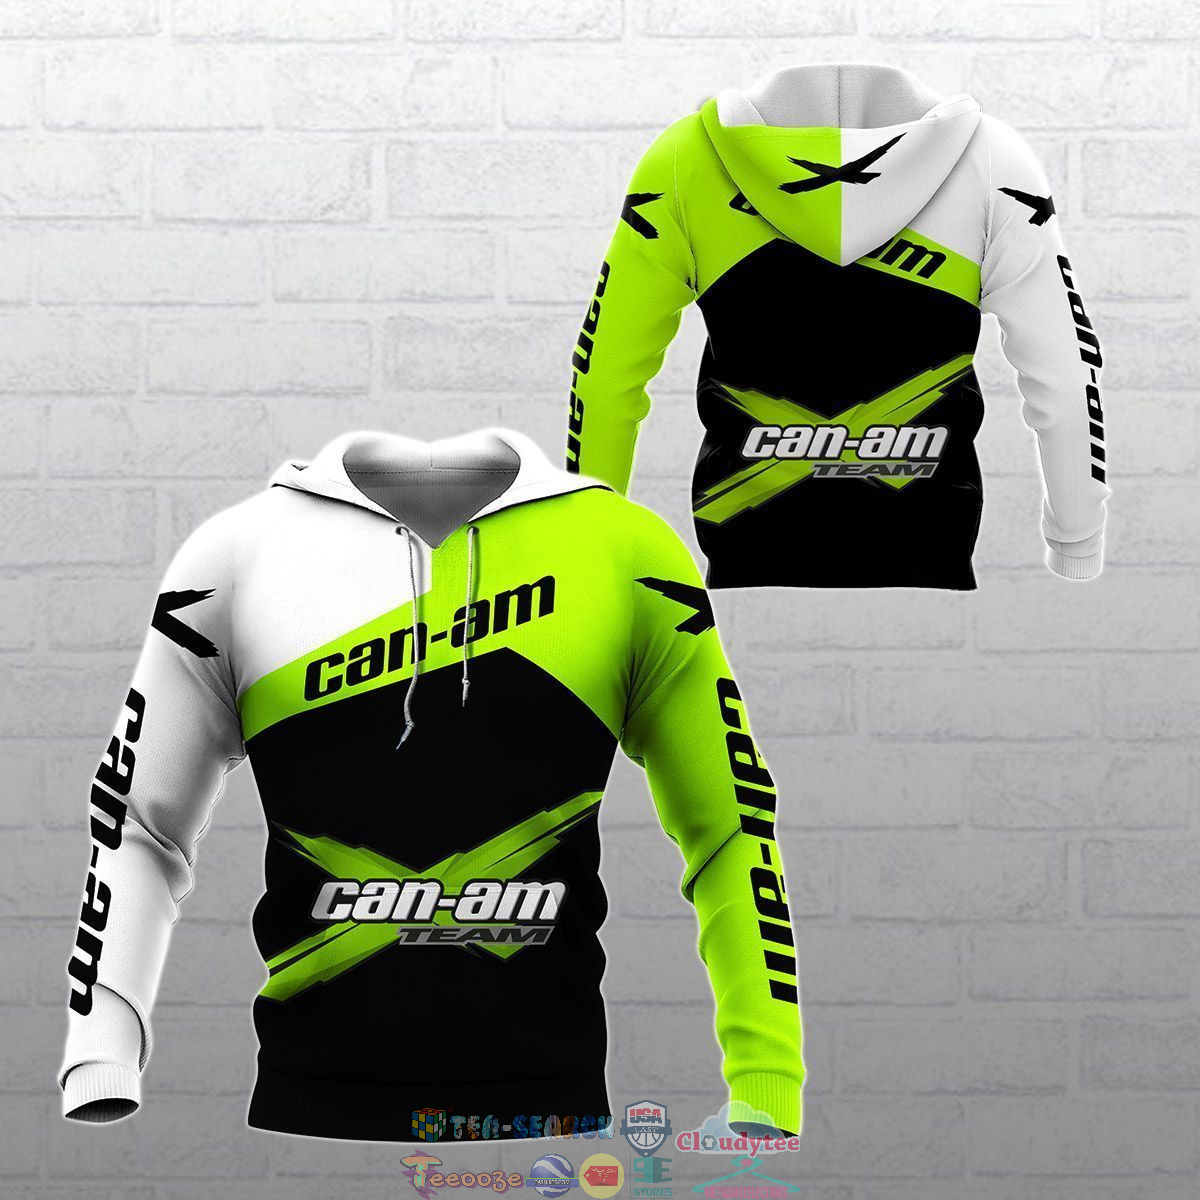 Can-Am Team ver 3 3D hoodie and t-shirt- Saleoff